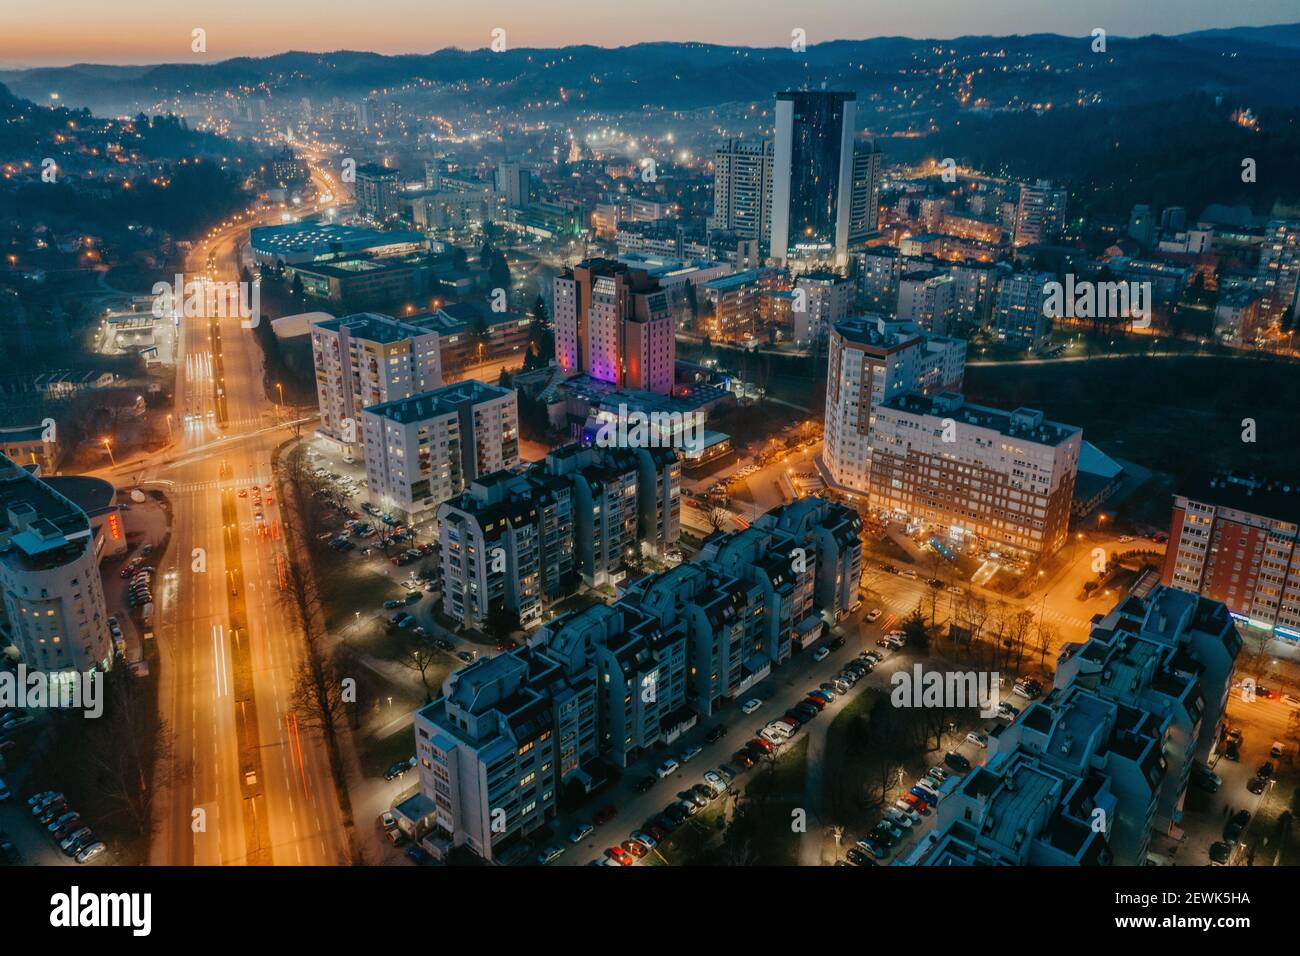 An aerial view of beautiful Tuzla cityscape in Bosnia and Herzegovina at night Stock Photo